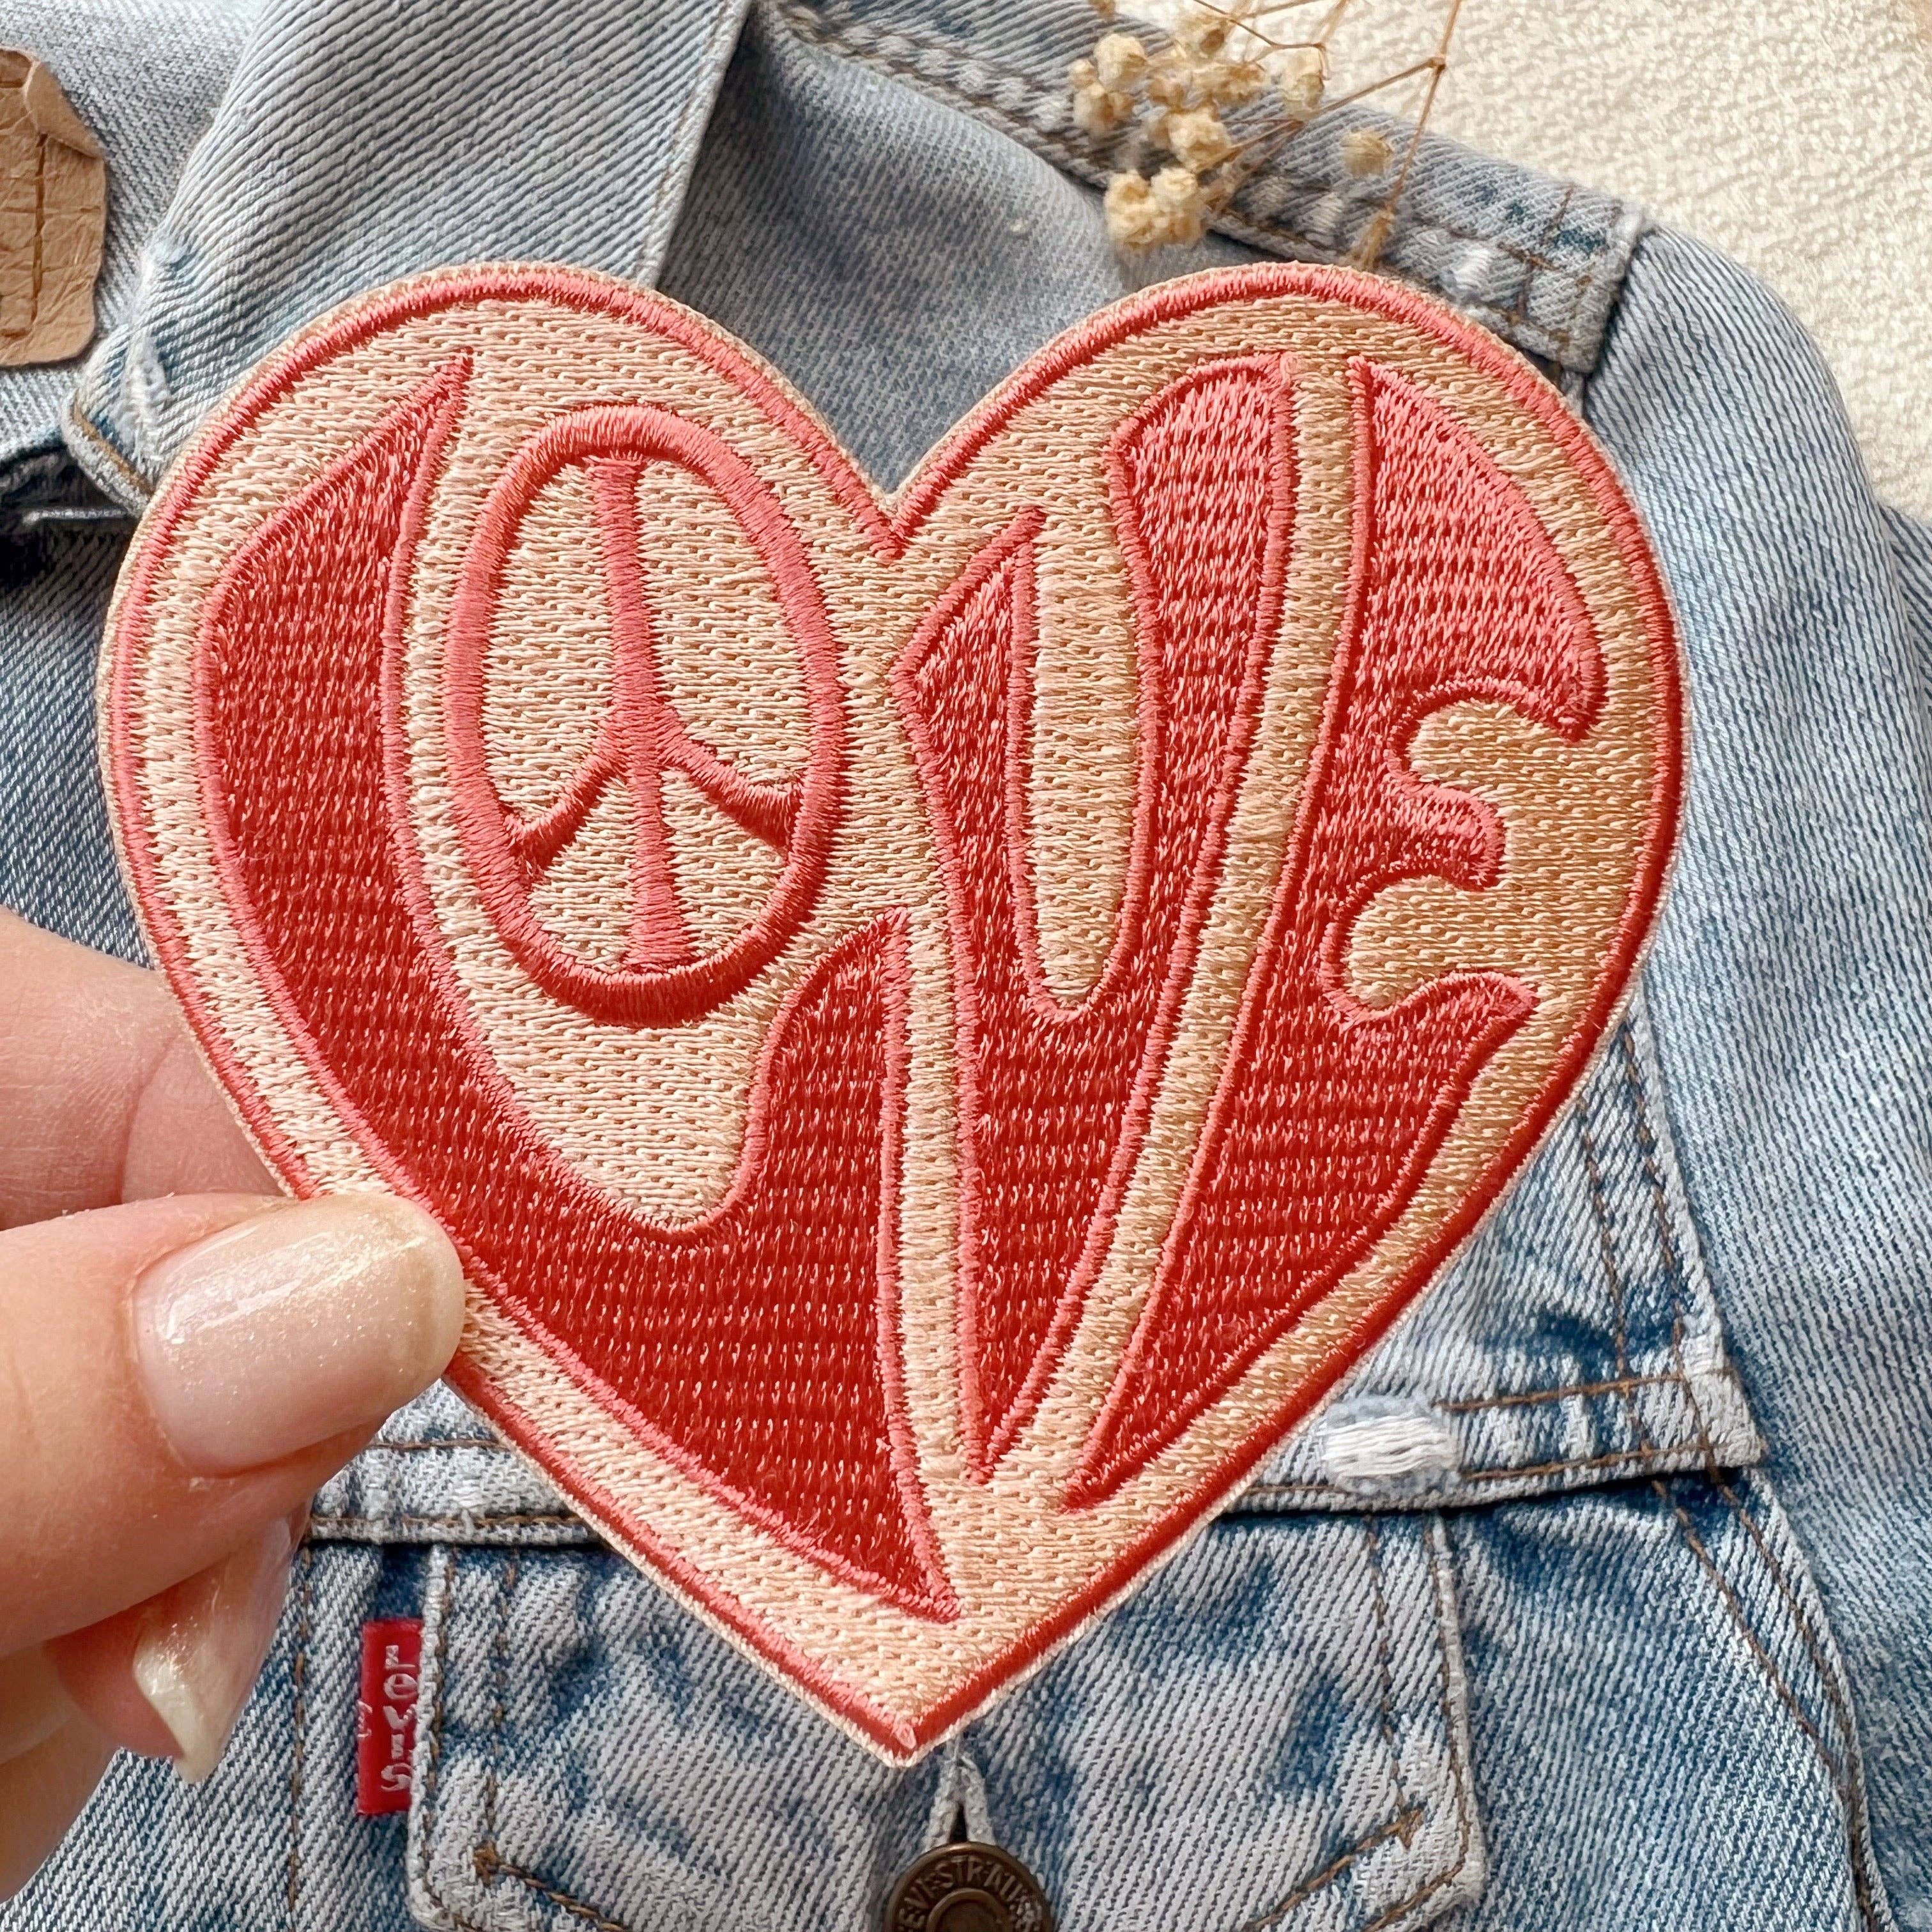 Embroidered Heart with Eyes Patch, Cute Heart Patches